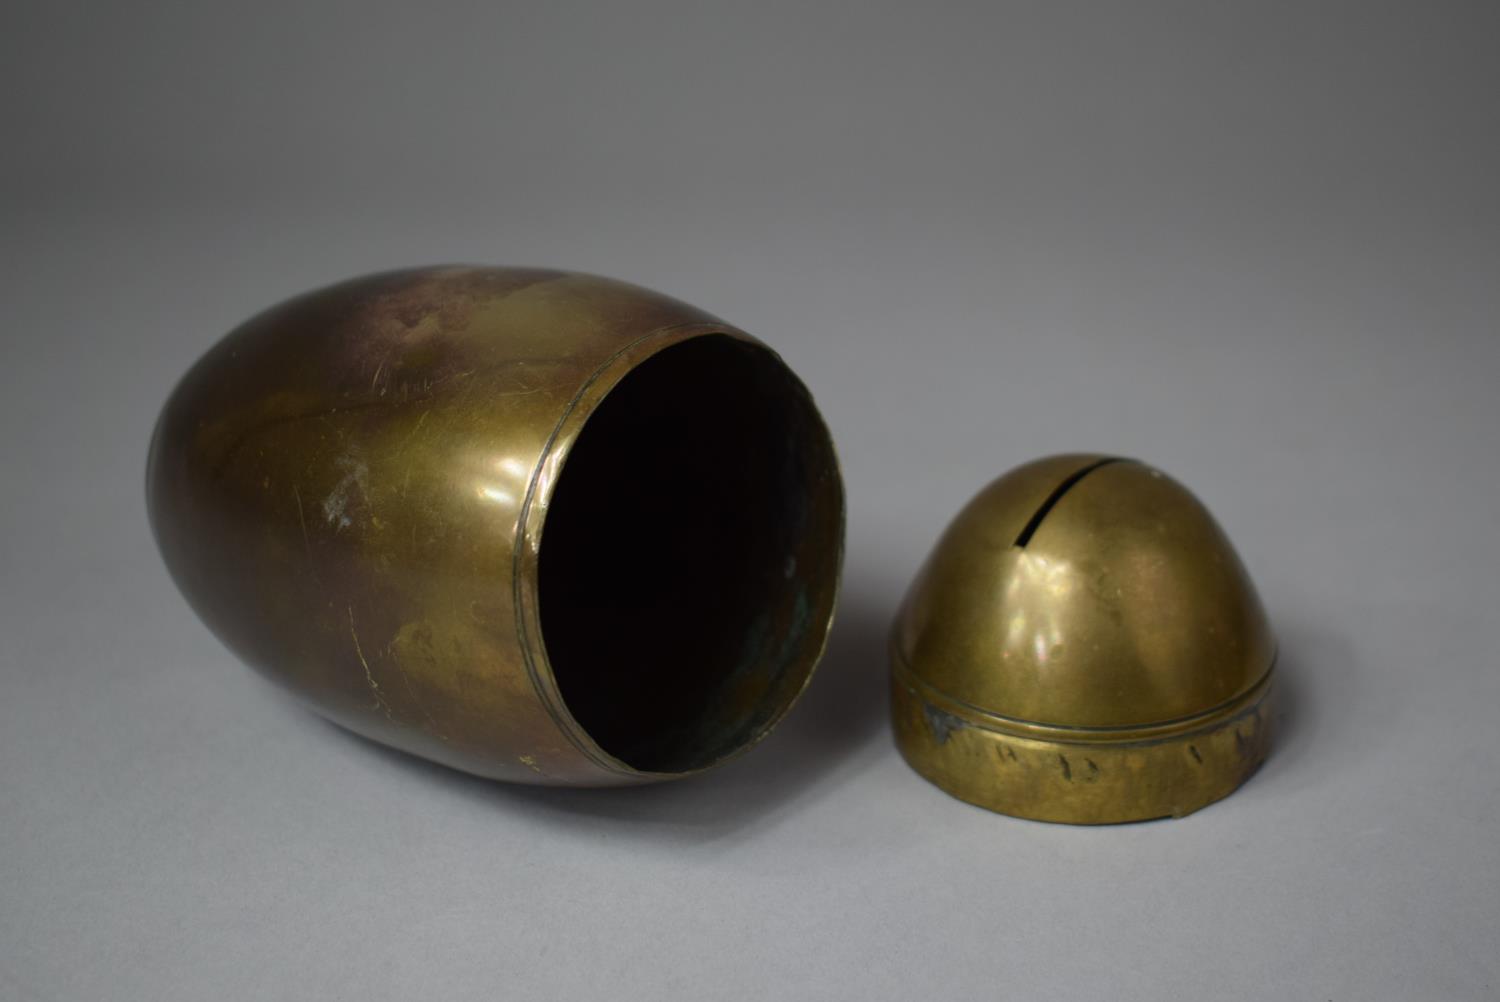 A Brass Trench Art Style Ovoid Money Box with Removable Lid, 14cm High - Image 3 of 3